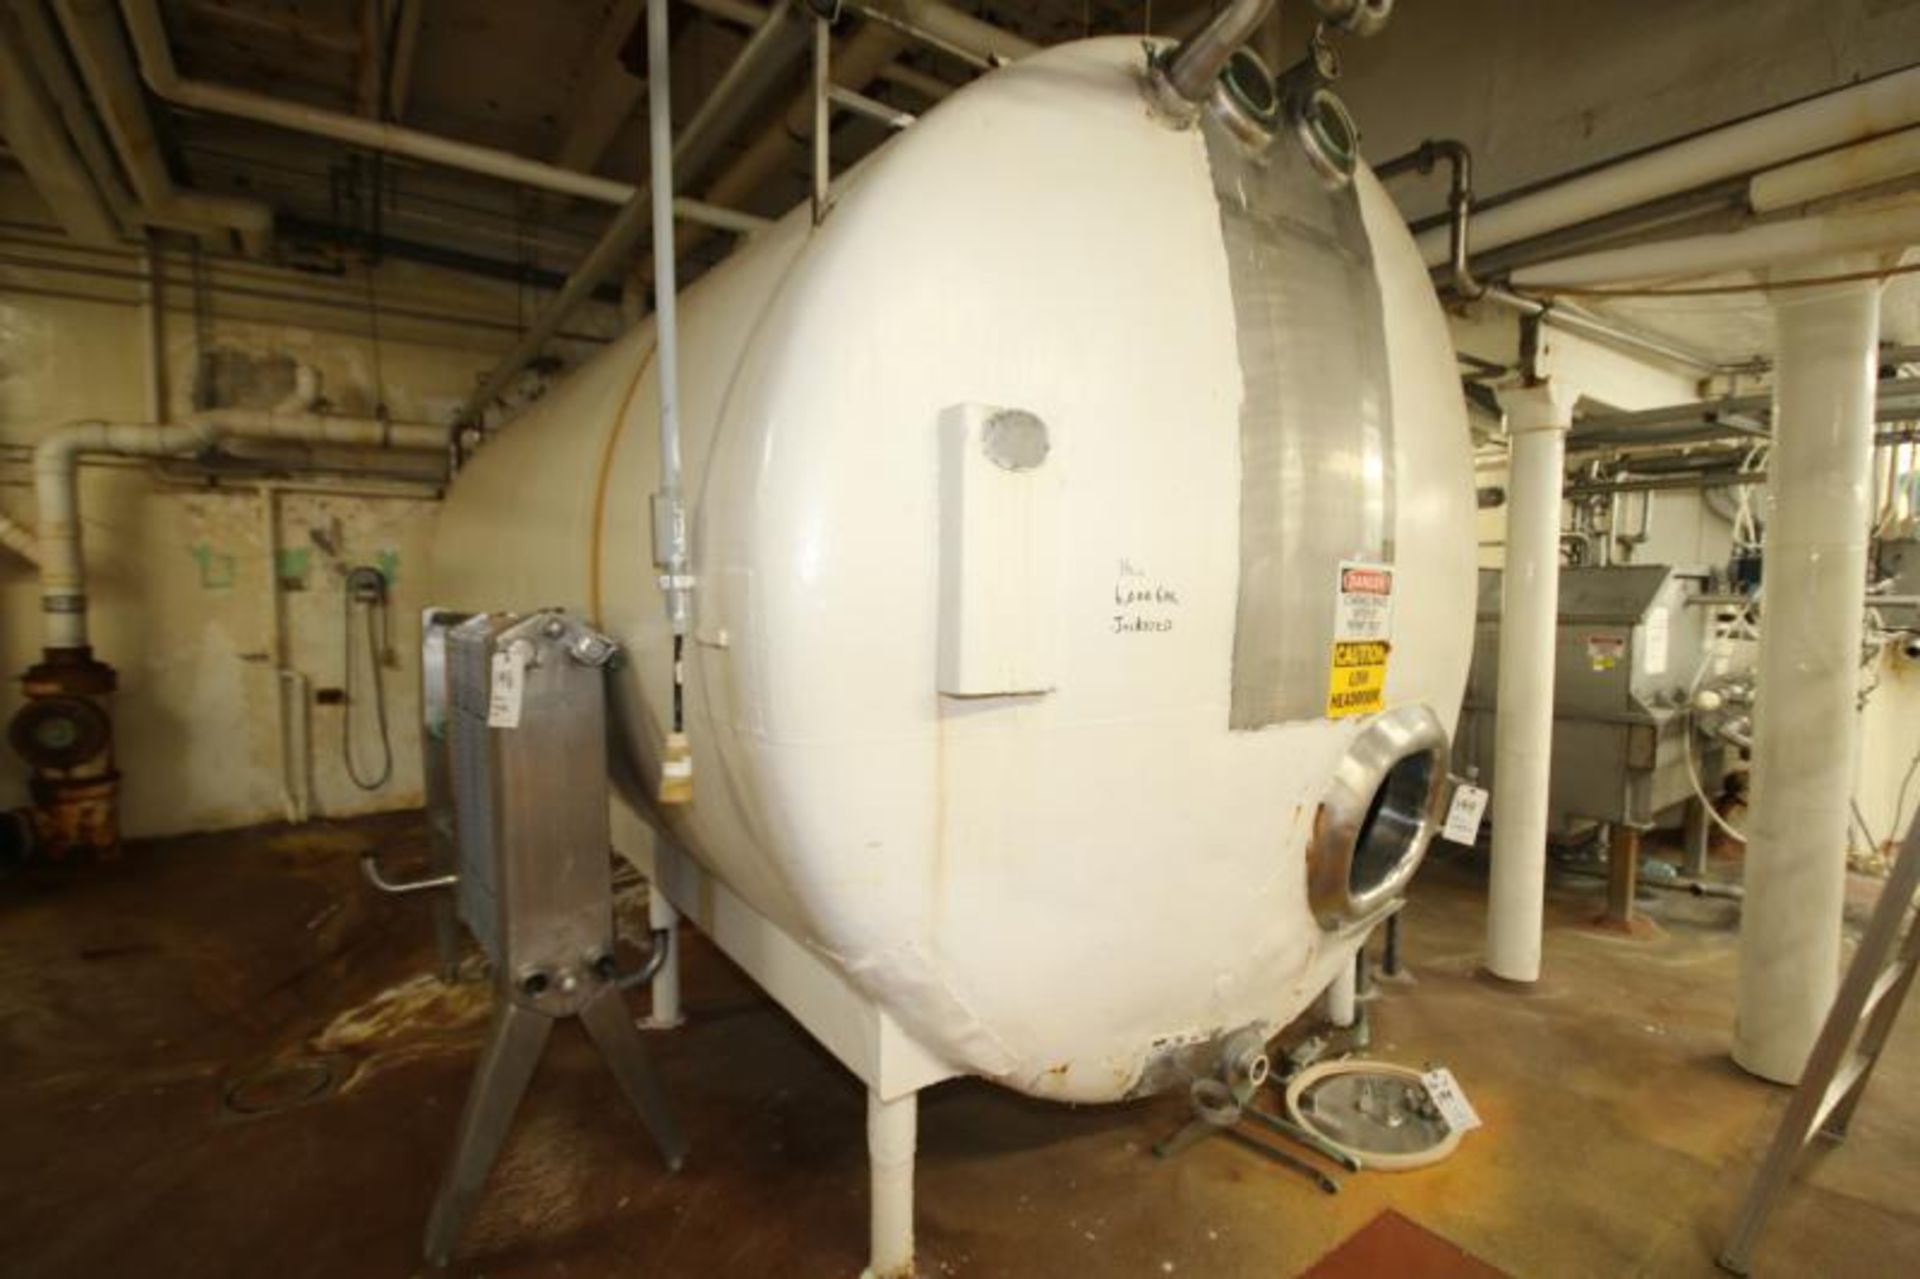 Heil 6,000 Gal Horizontal Jacketed S/S Tank, S/N 174092, Includes Sprayballs, Set- Up for Vertical